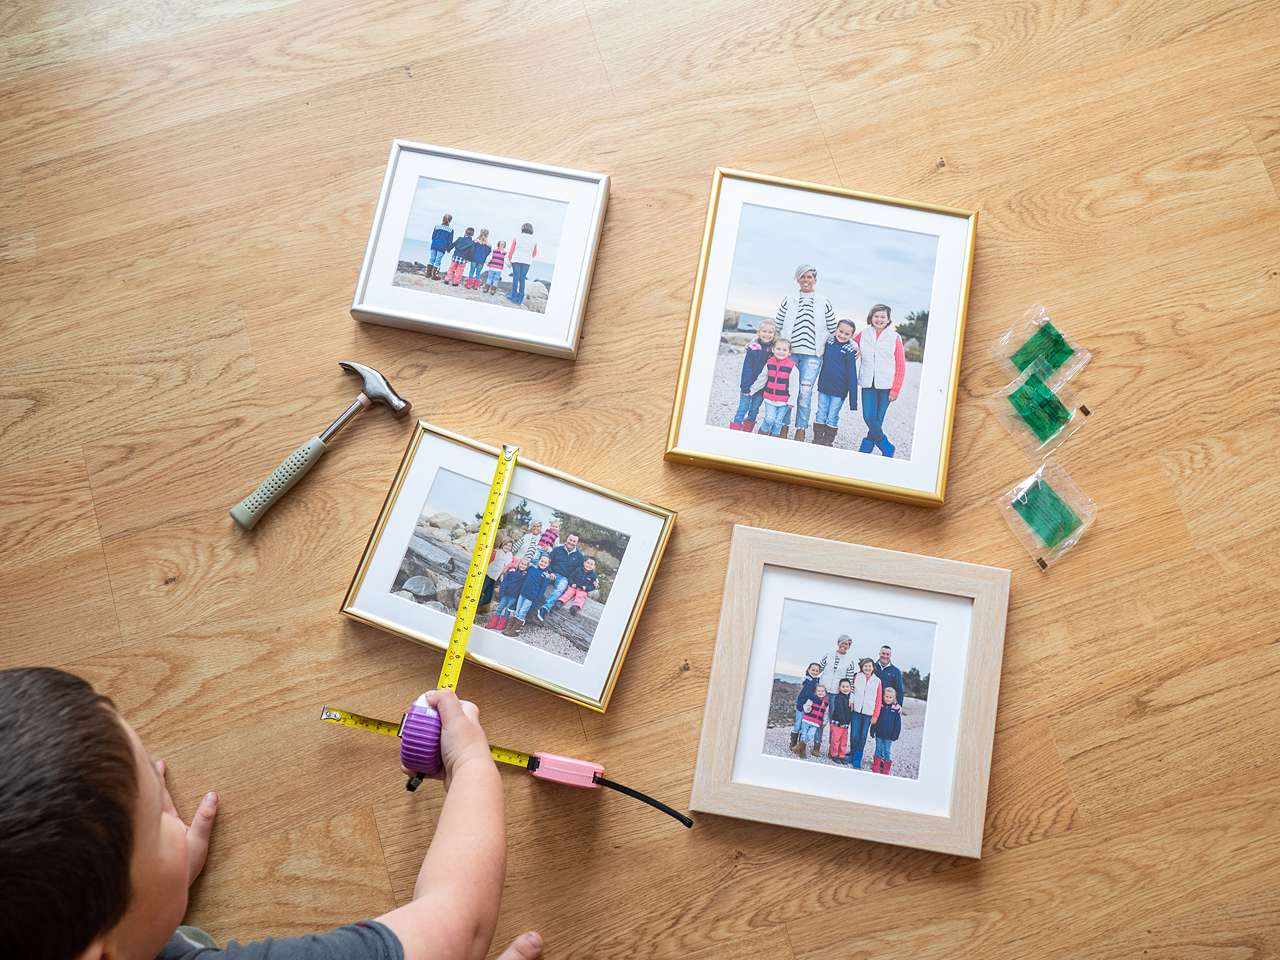 How to Calculate the Outside Dimensions of a Picture Frame